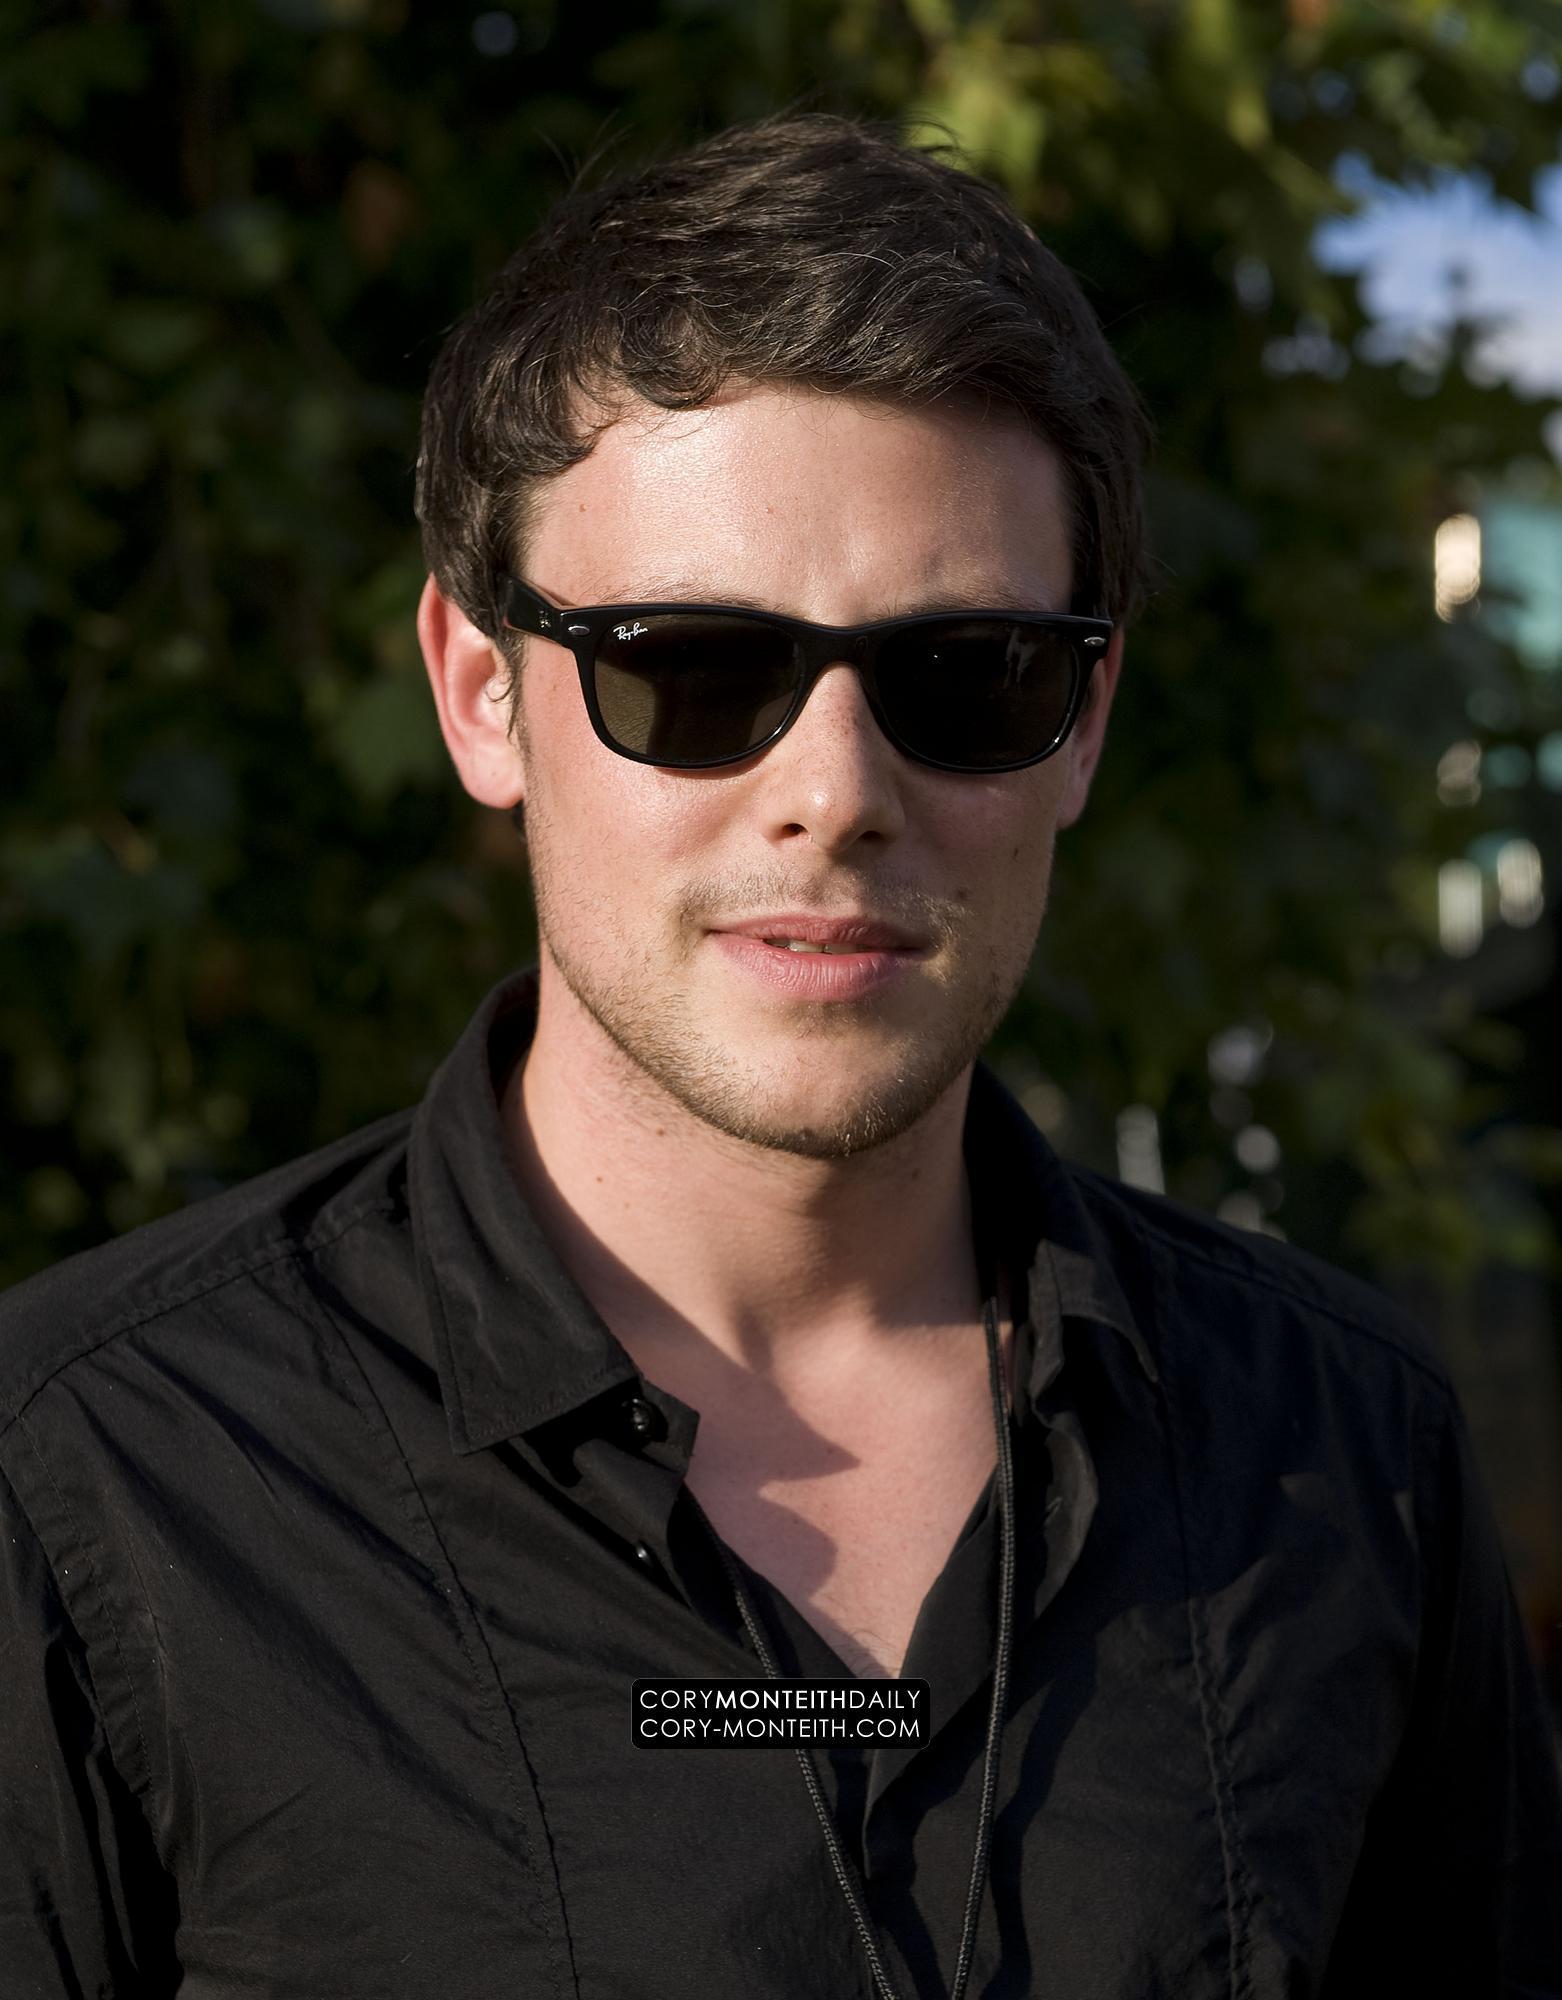 Cory Monteith - Images Actress